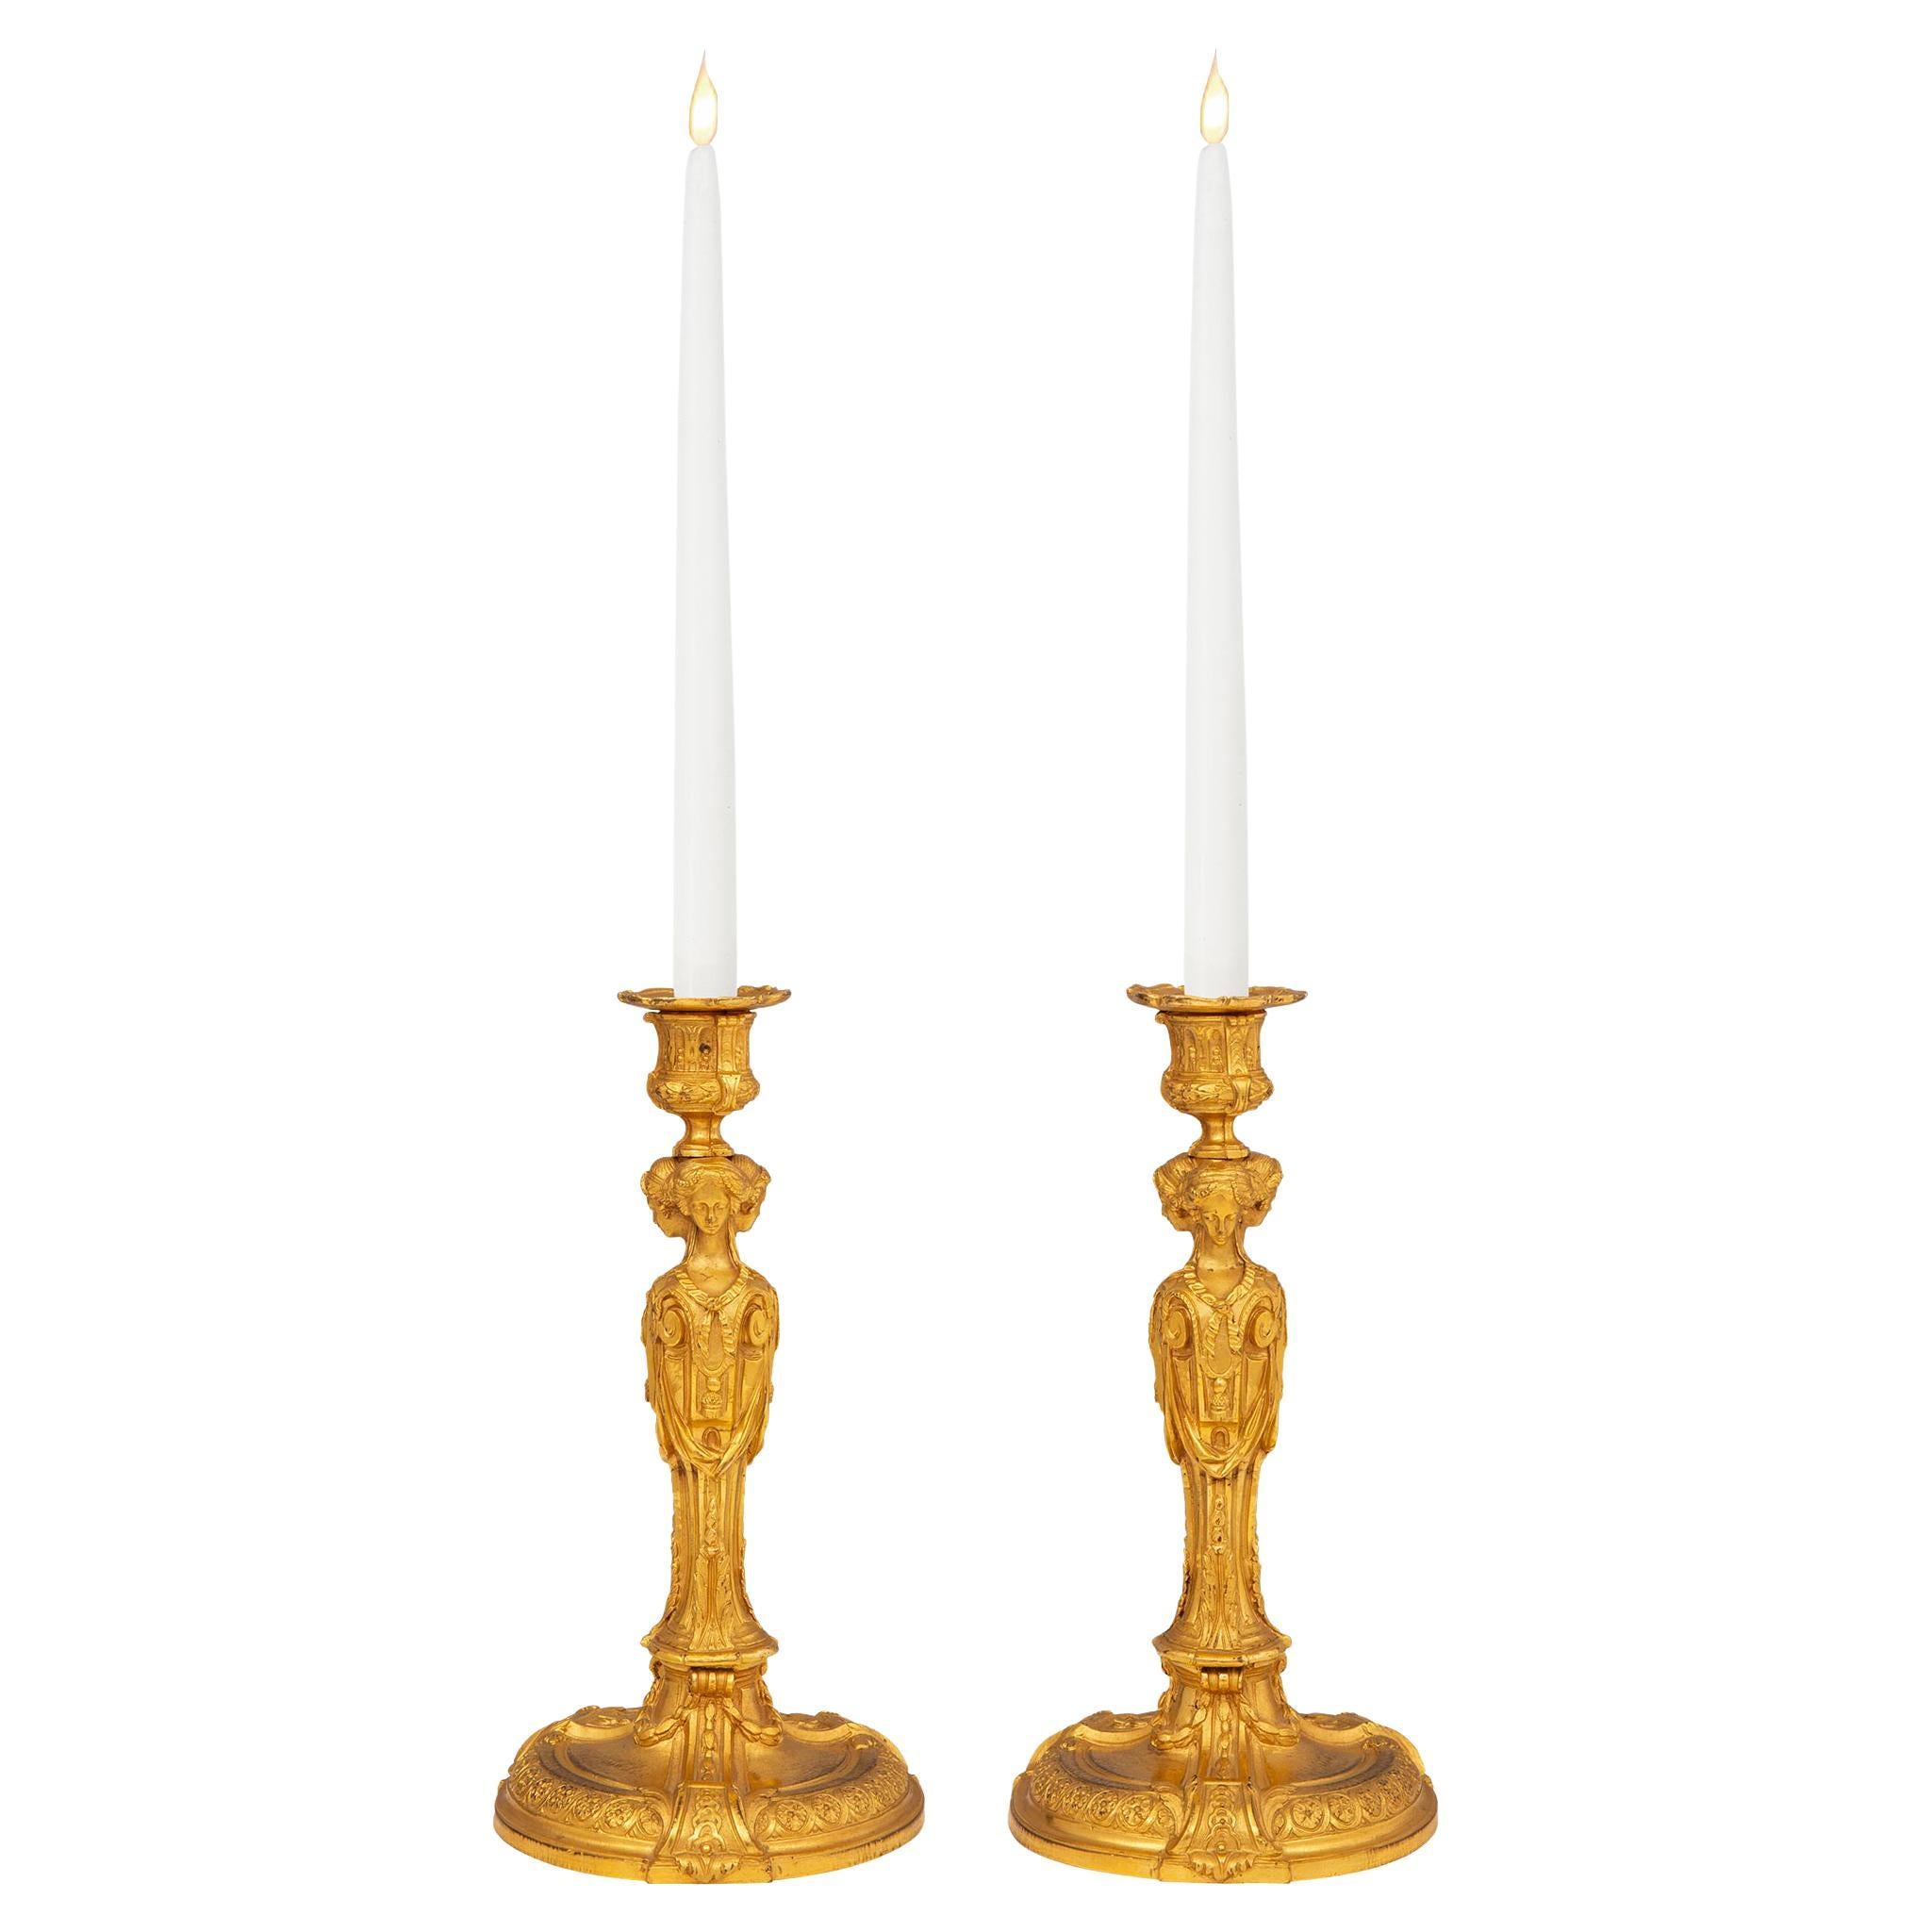 Pair of Early 19th Century Louis XVI Style Ormolu Candlesticks For Sale